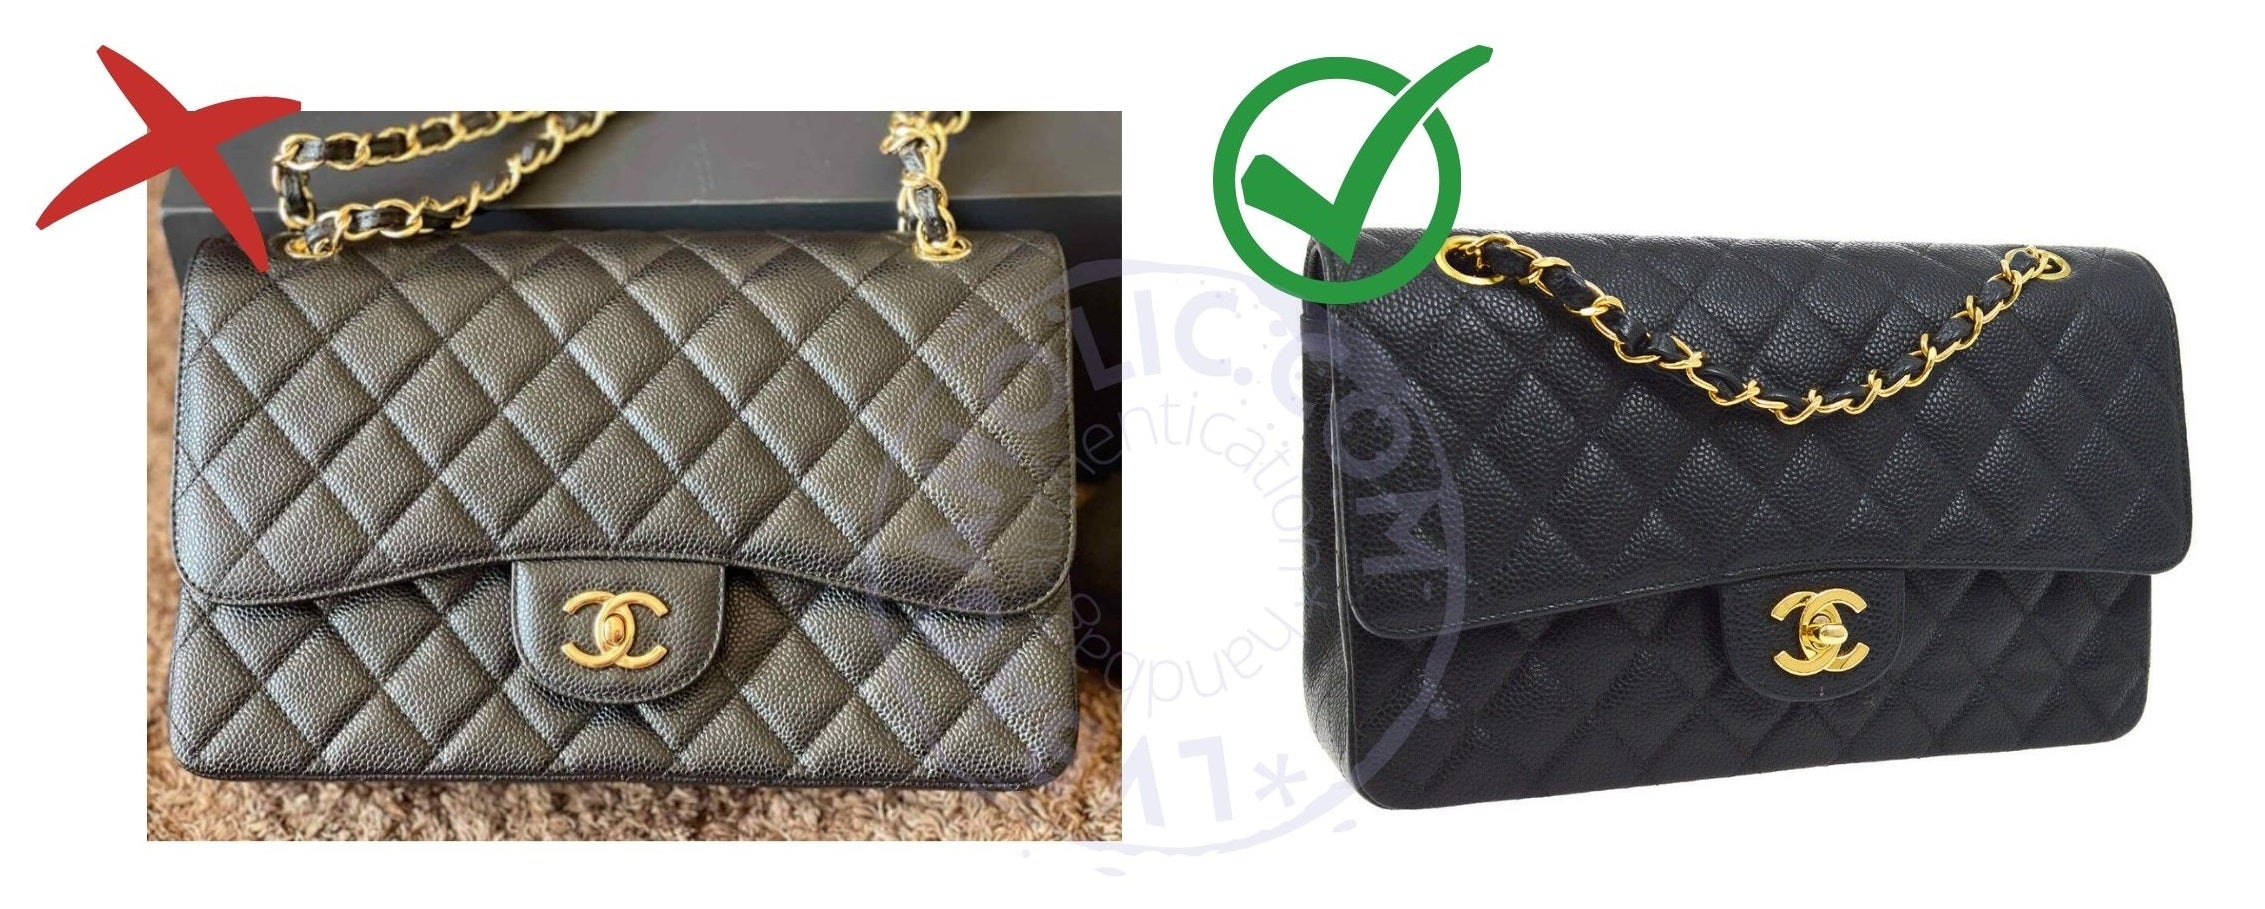 Authenticating Chanel Bags: Real vs Fake Examples [20 Pictures] – Bagaholic